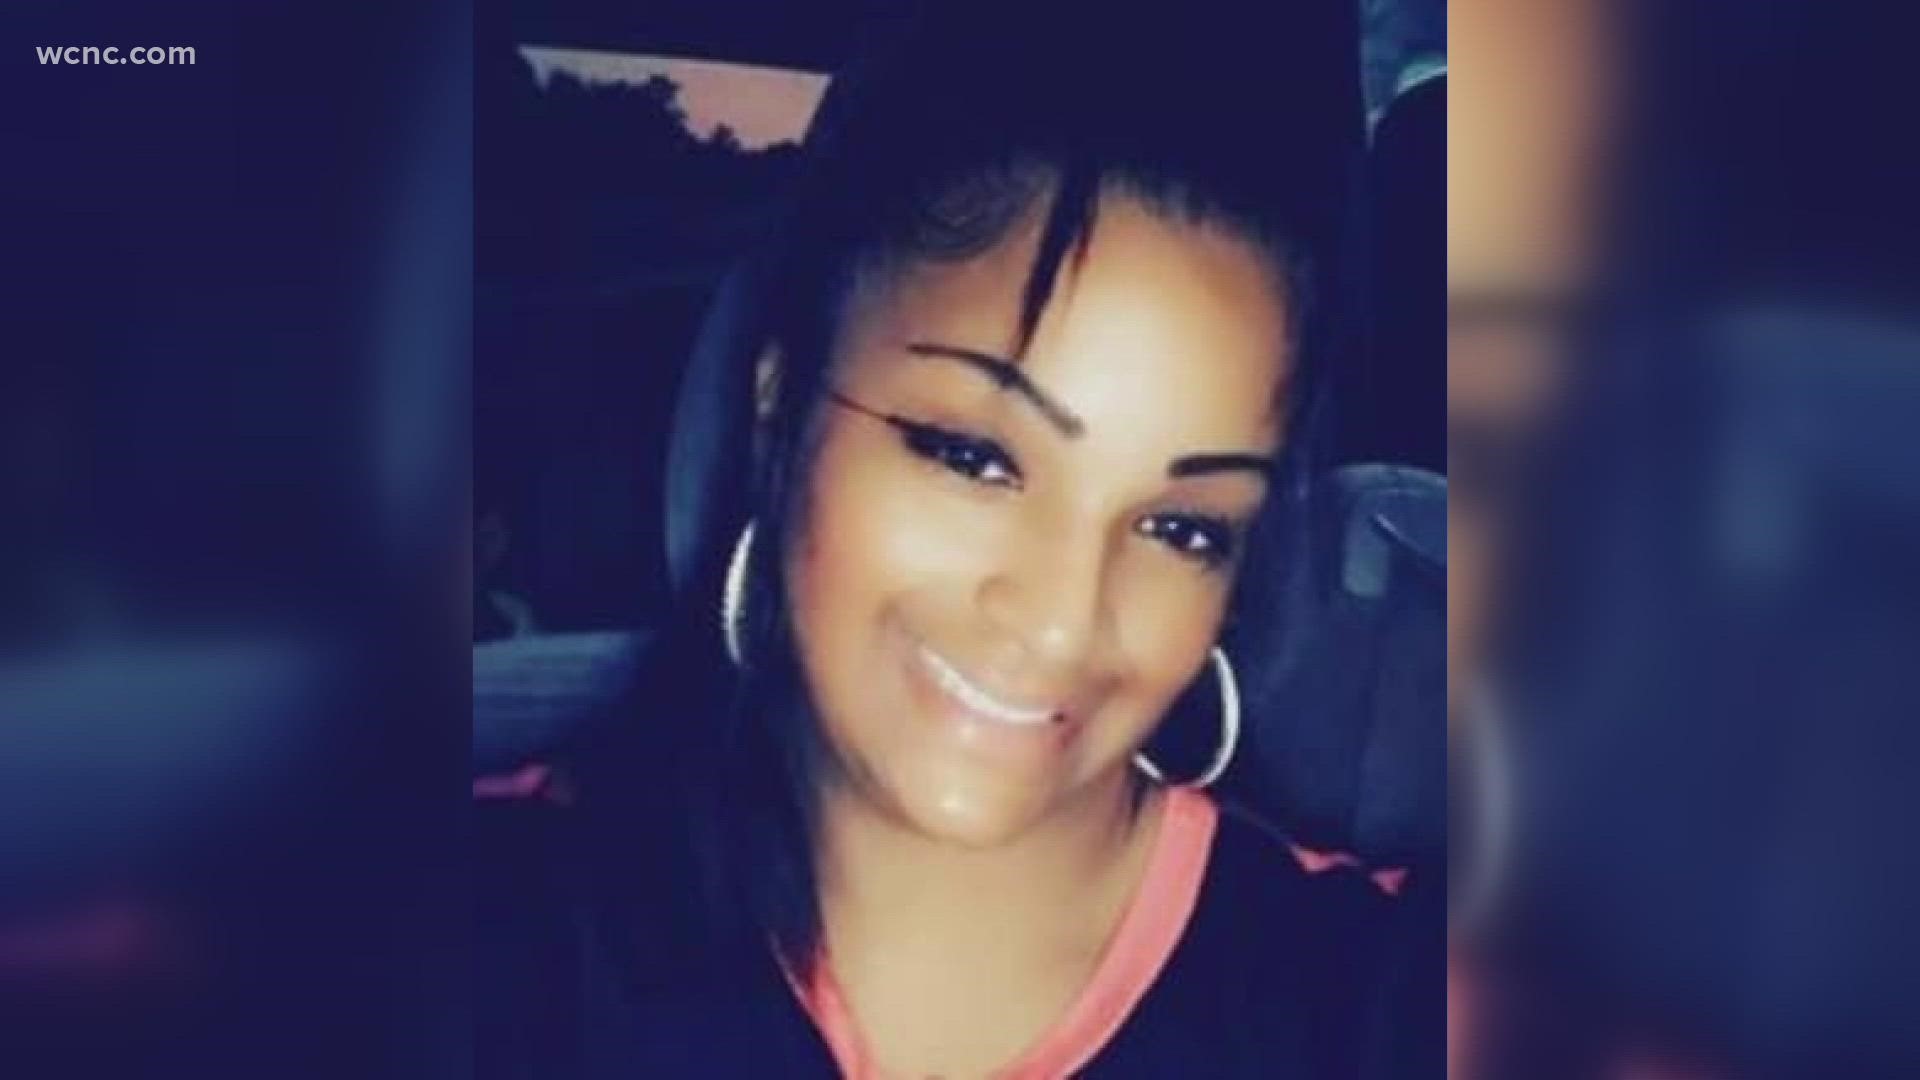 41-year-old Deidre Reid was supposed to be making a trip from the town of Pageland to Charlotte but her family says they haven't heard from her.